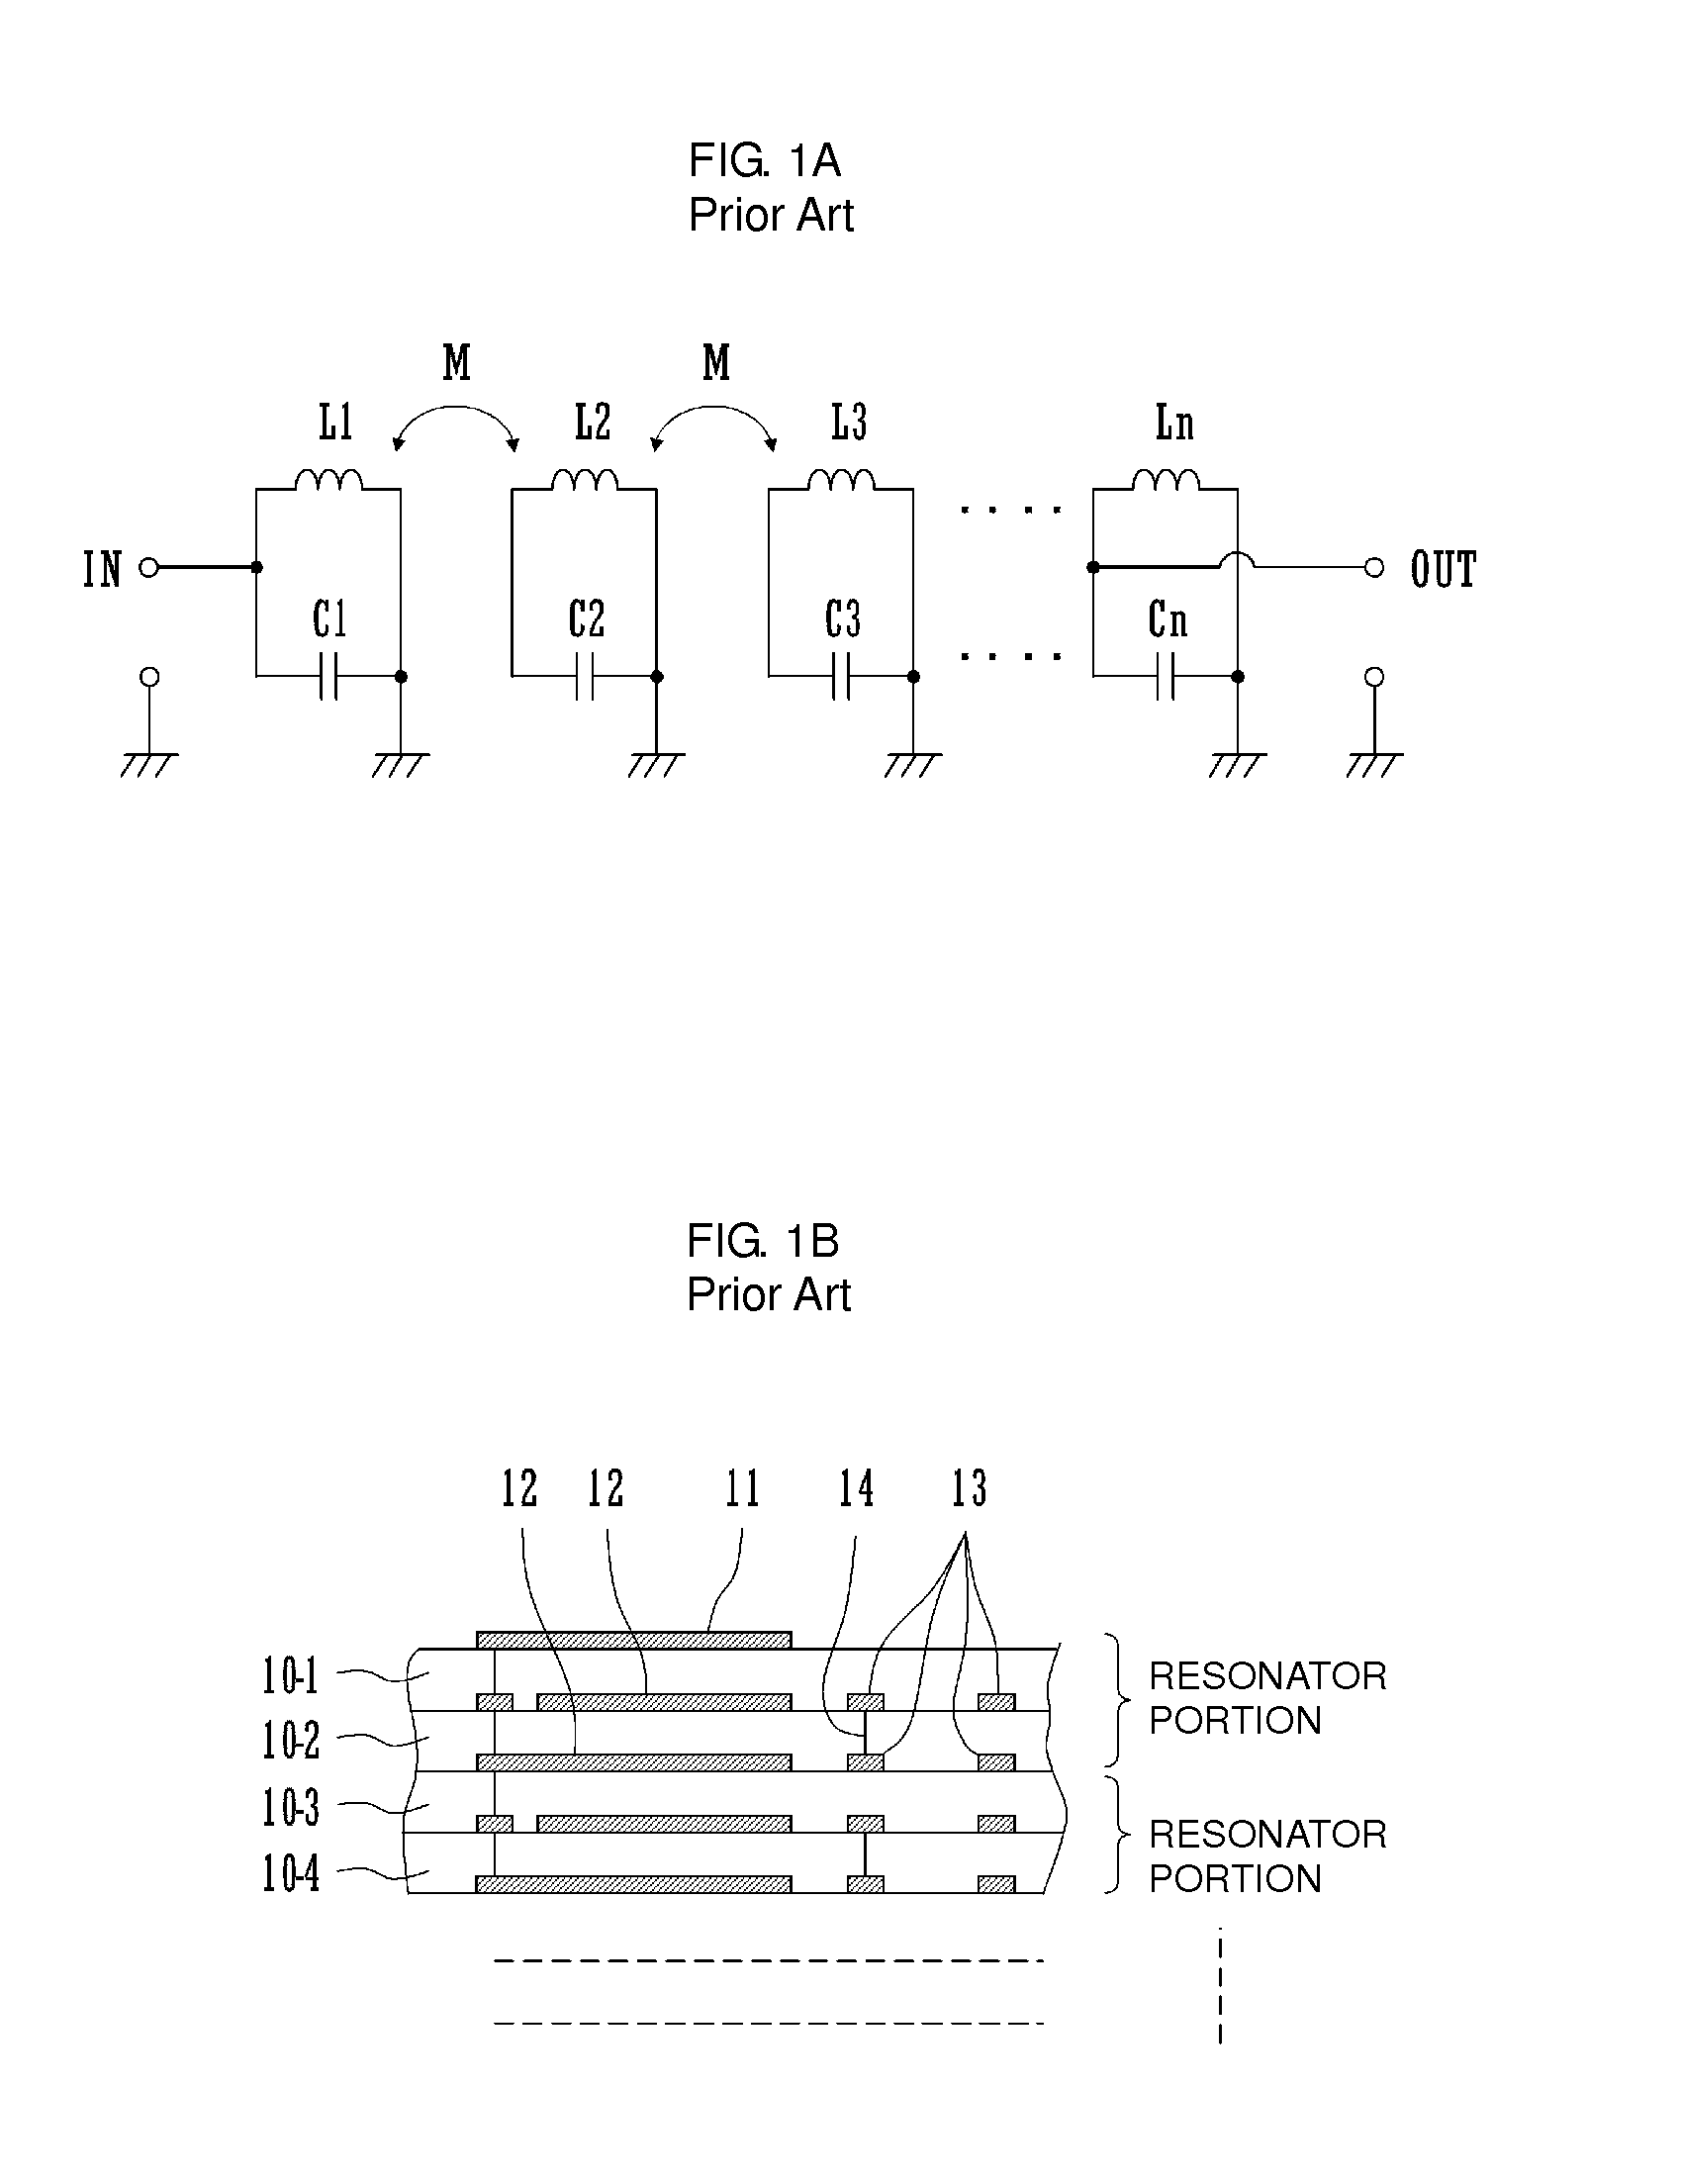 Laminated band-pass filter having an even number of LC parallel resonators